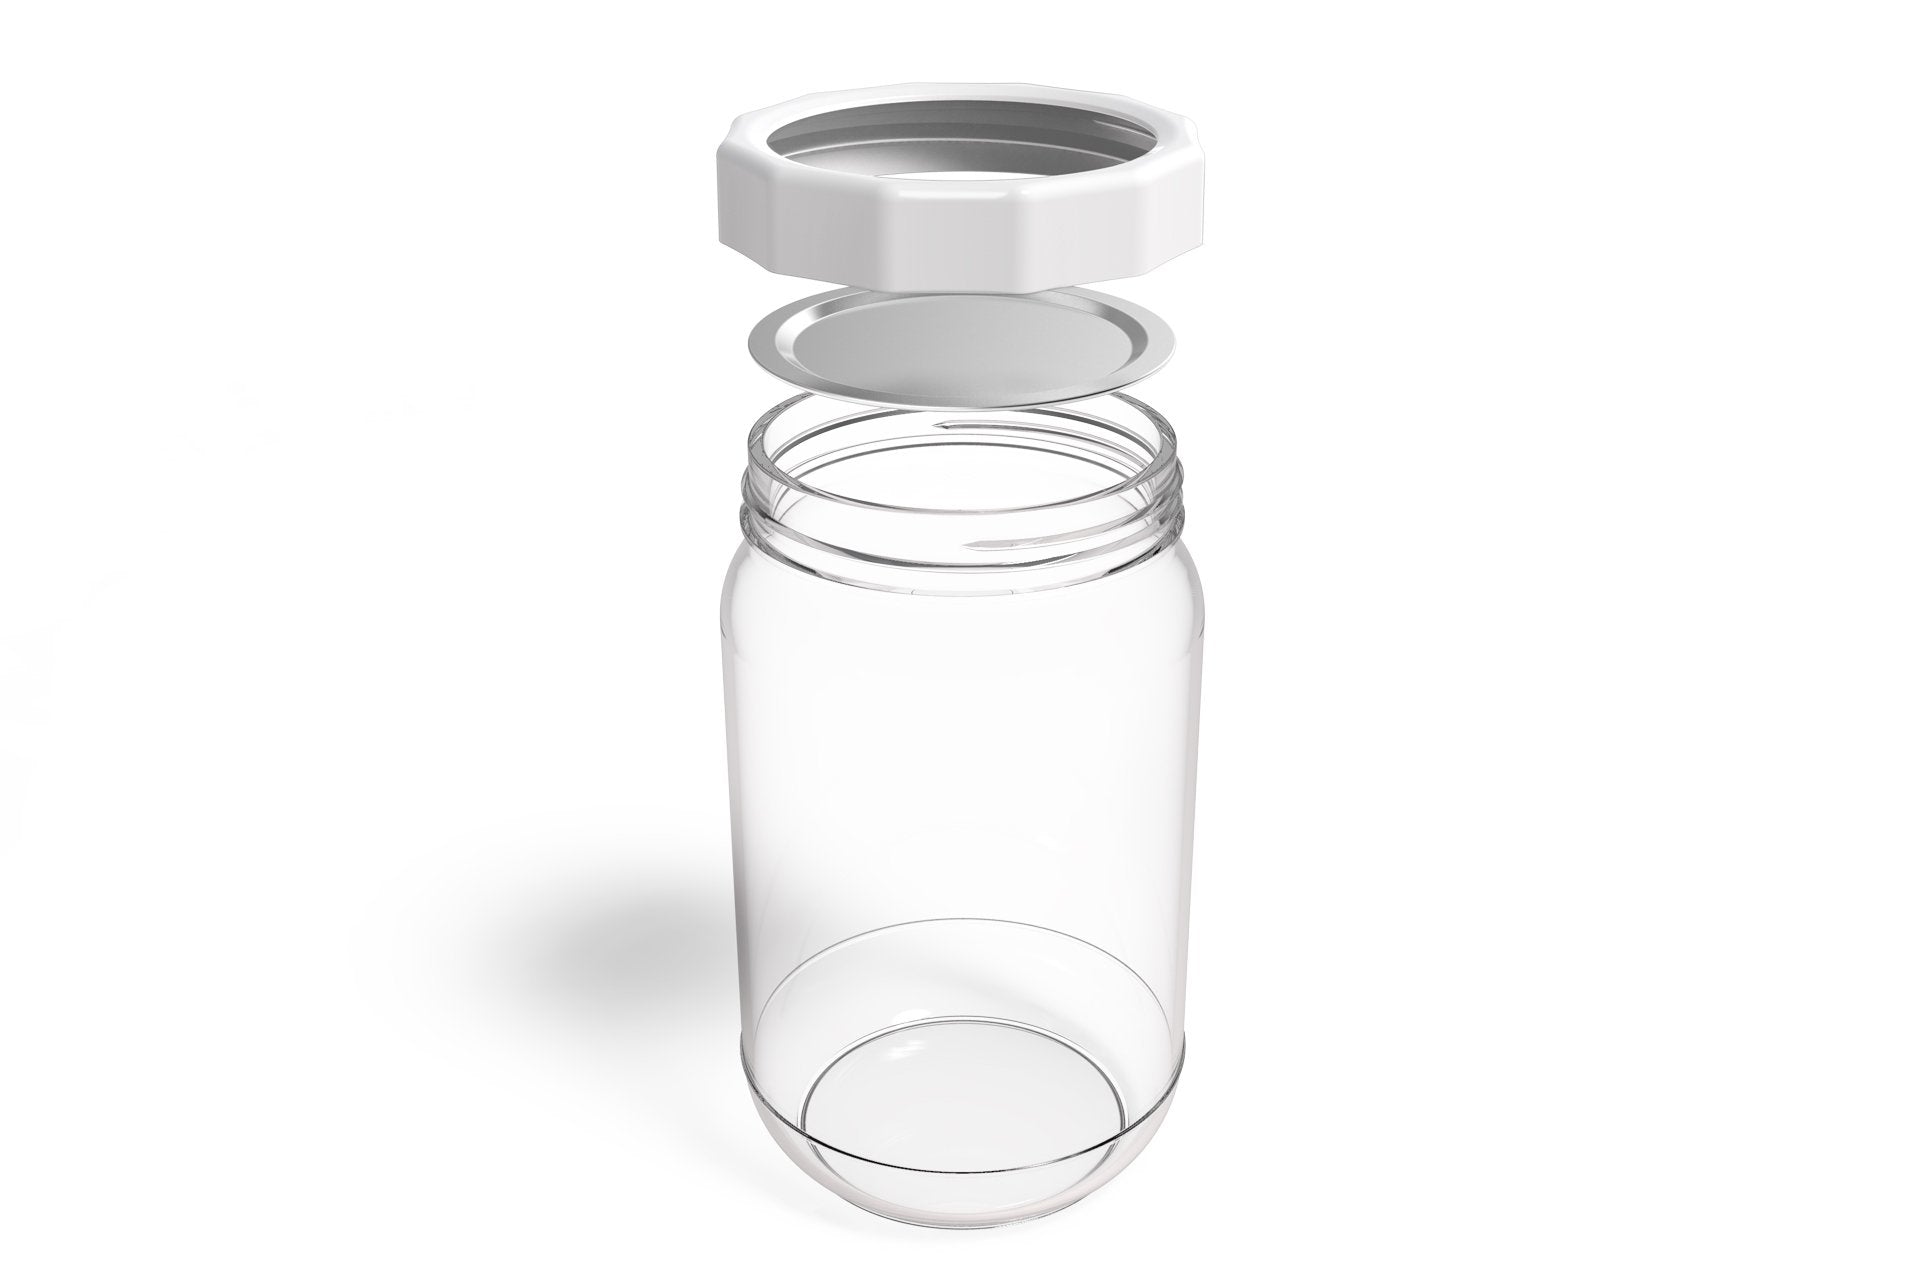 Masontops - Tough Bands 4 Pack All Things Being Eco CHilliwack Zero Waste Refillery Since 2008 Mason Jar Accessories